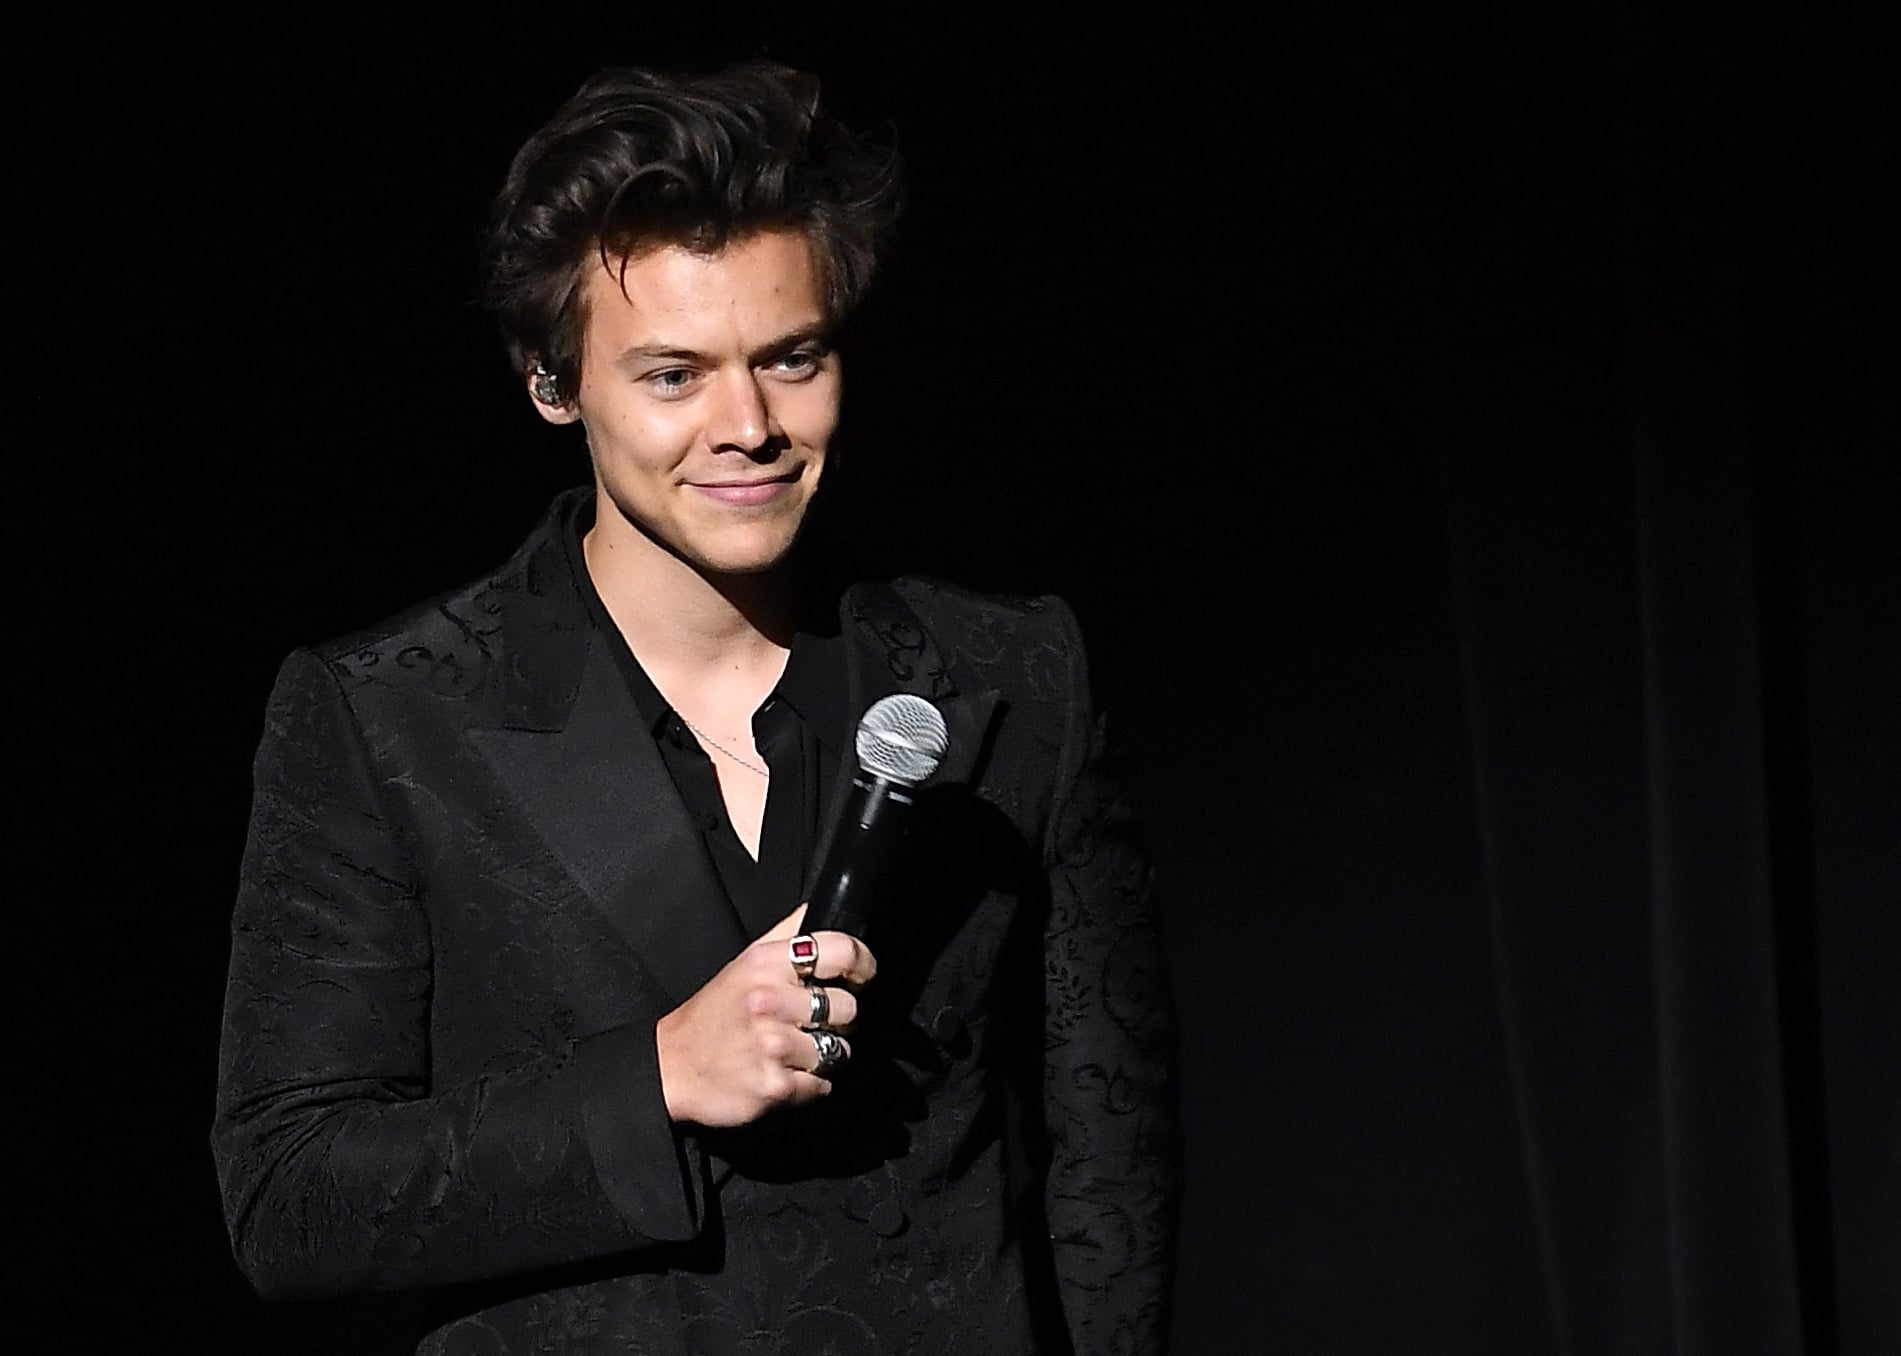 Musician/actor Harry Styles performs at the 2018 MusiCares Person Of The Year gala at Radio City Music Hall in New York on January 26, 2018.The 2018 MusiCares Person of the Year award was presented to Fleetwood Mac at the 28th annual MusiCares Gala Tribute dinner and concert ahead of Sunday's 60th GRAMMY Awards, marking the first time the benefit has honoured a band. Proceeds from the event go towards MusiCares. / AFP PHOTO / ANGELA WEISS        (Photo credit should read ANGELA WEISS/AFP/Getty Images)